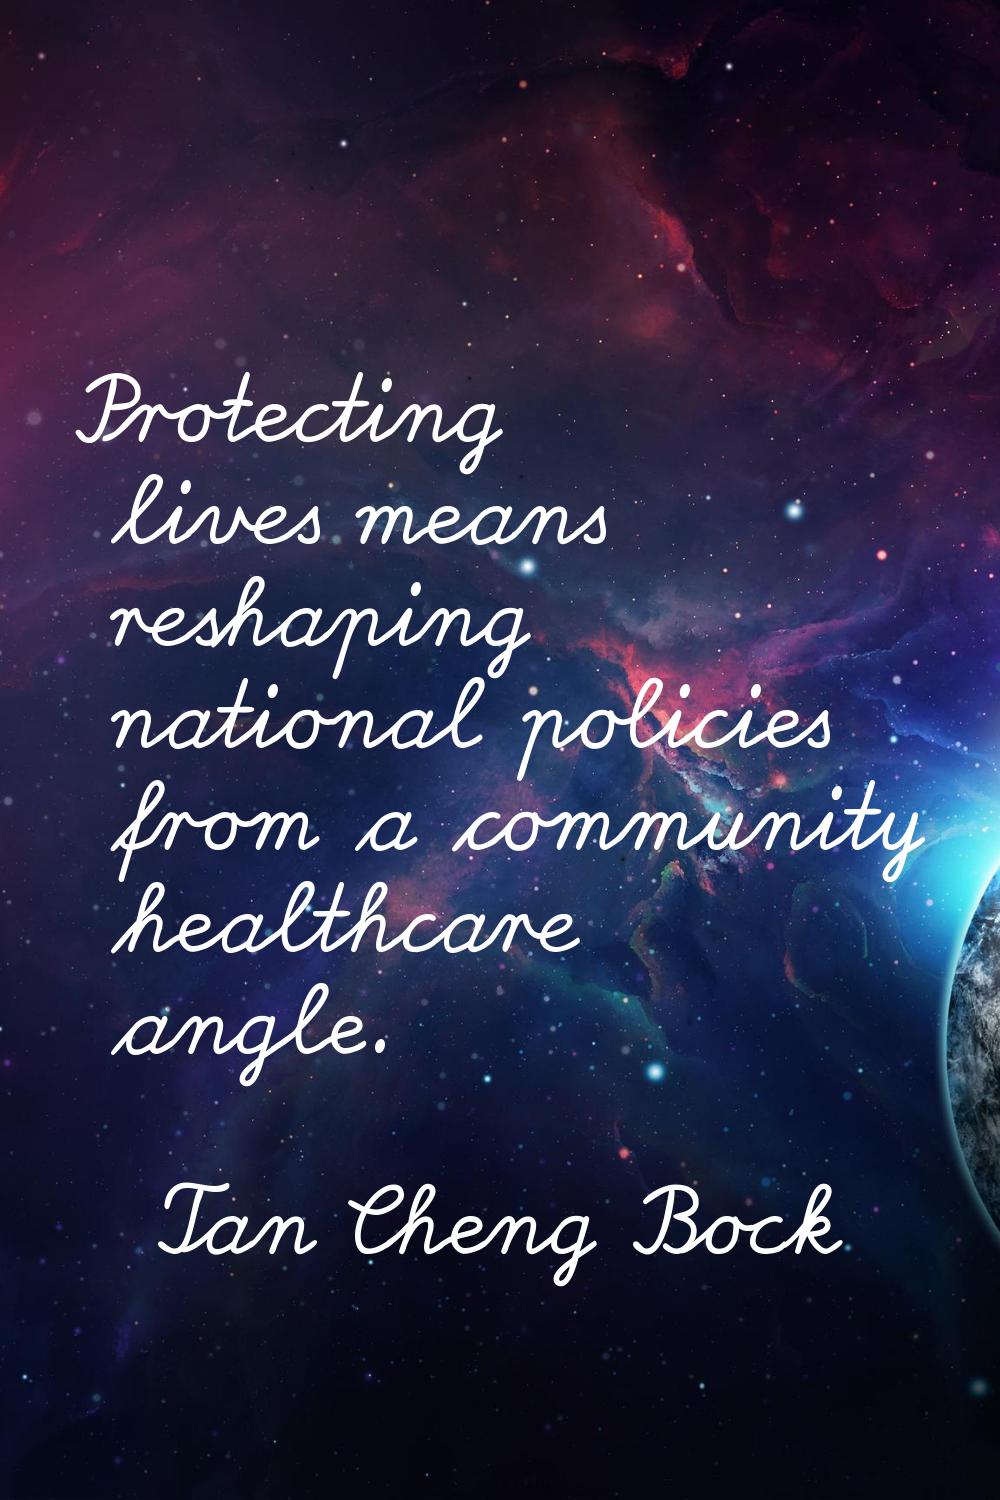 Protecting lives means reshaping national policies from a community healthcare angle.